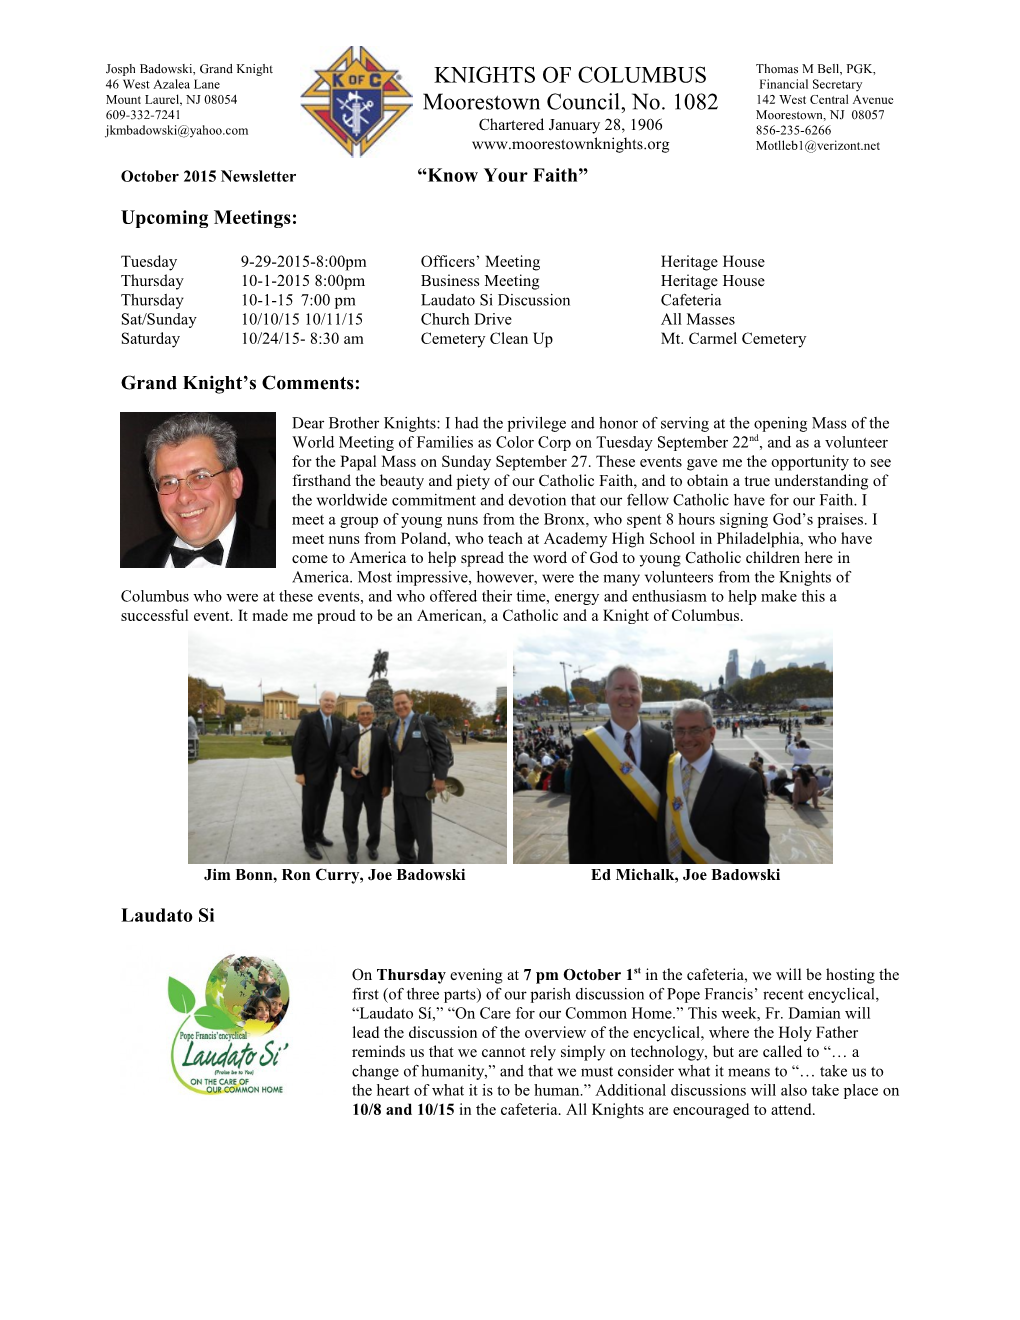 October 2015 Newsletter Know Your Faith